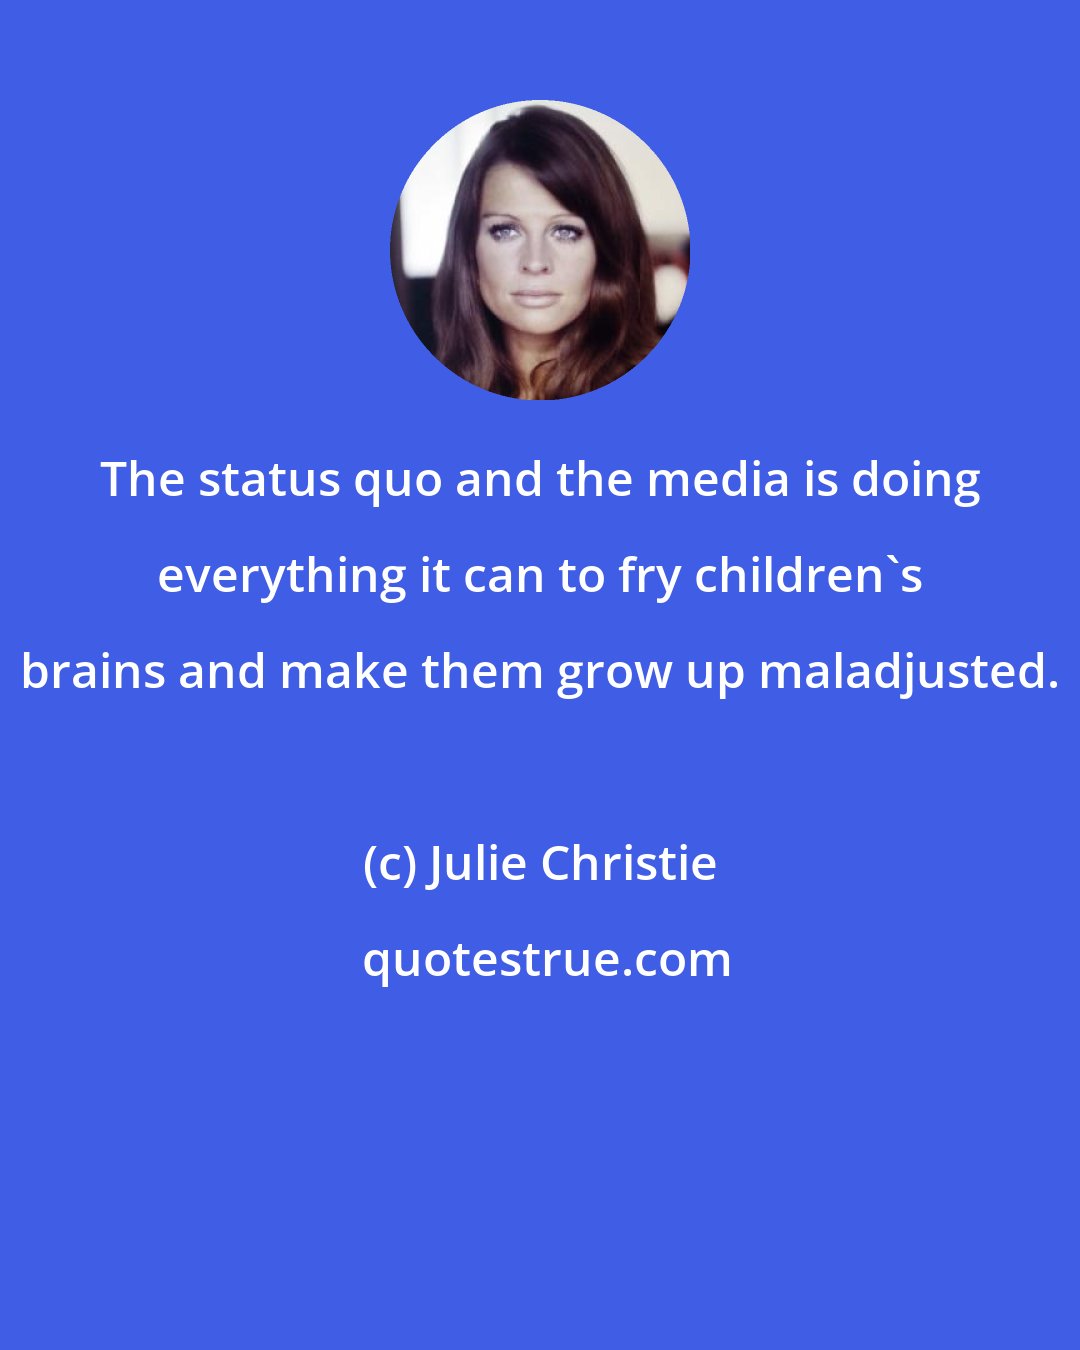 Julie Christie: The status quo and the media is doing everything it can to fry children's brains and make them grow up maladjusted.